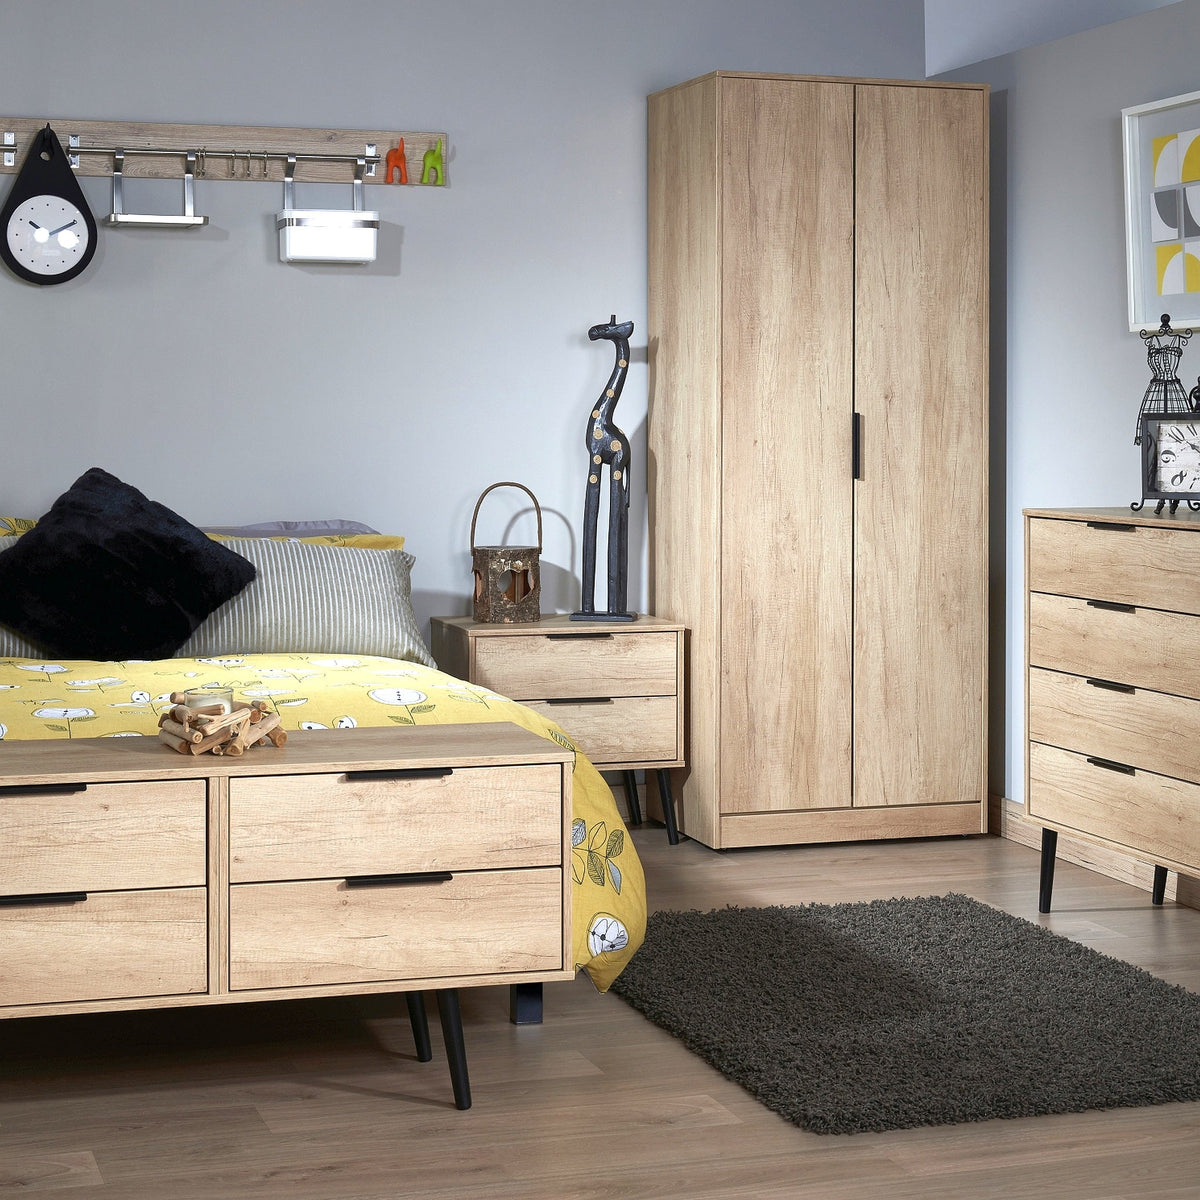 Asher Light Oak 4 Drawer Low Storage Chest with black legs for bedroom